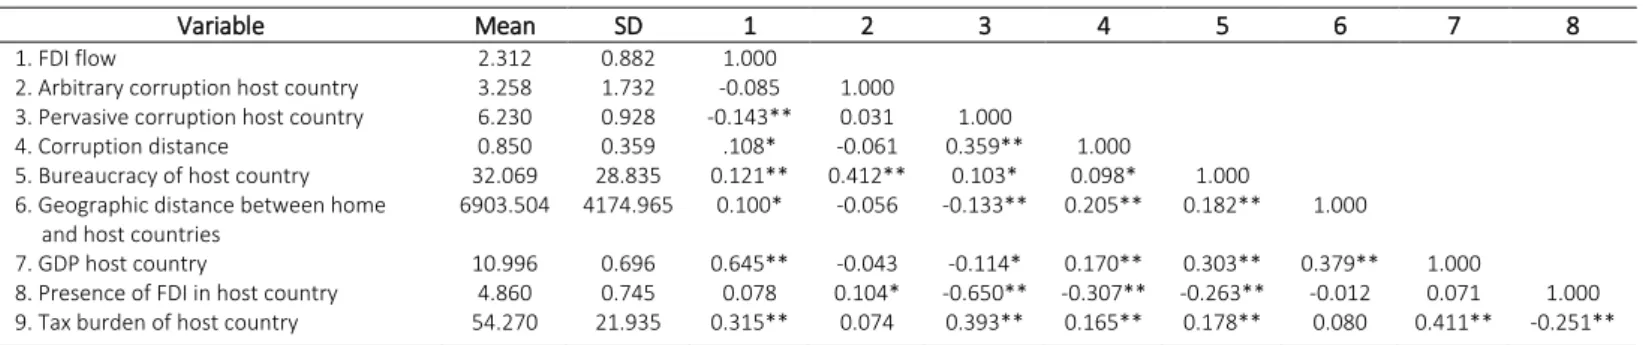 Table 2 shows the descriptive statistics, median and  standard  deviation  of  the  variables  and  their  correlations